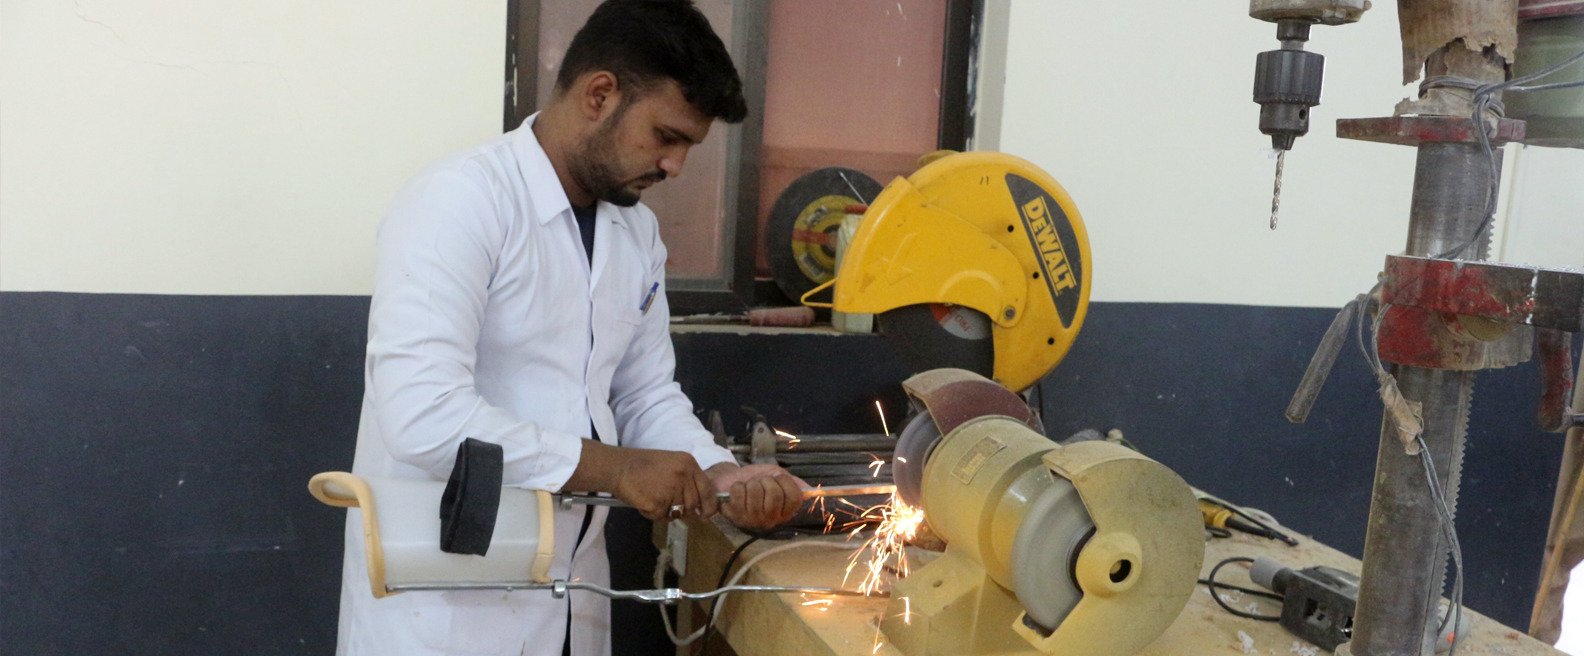 Callipers and prosthetic legs being developed at Healthcare and Social Welfare Association, Karachi